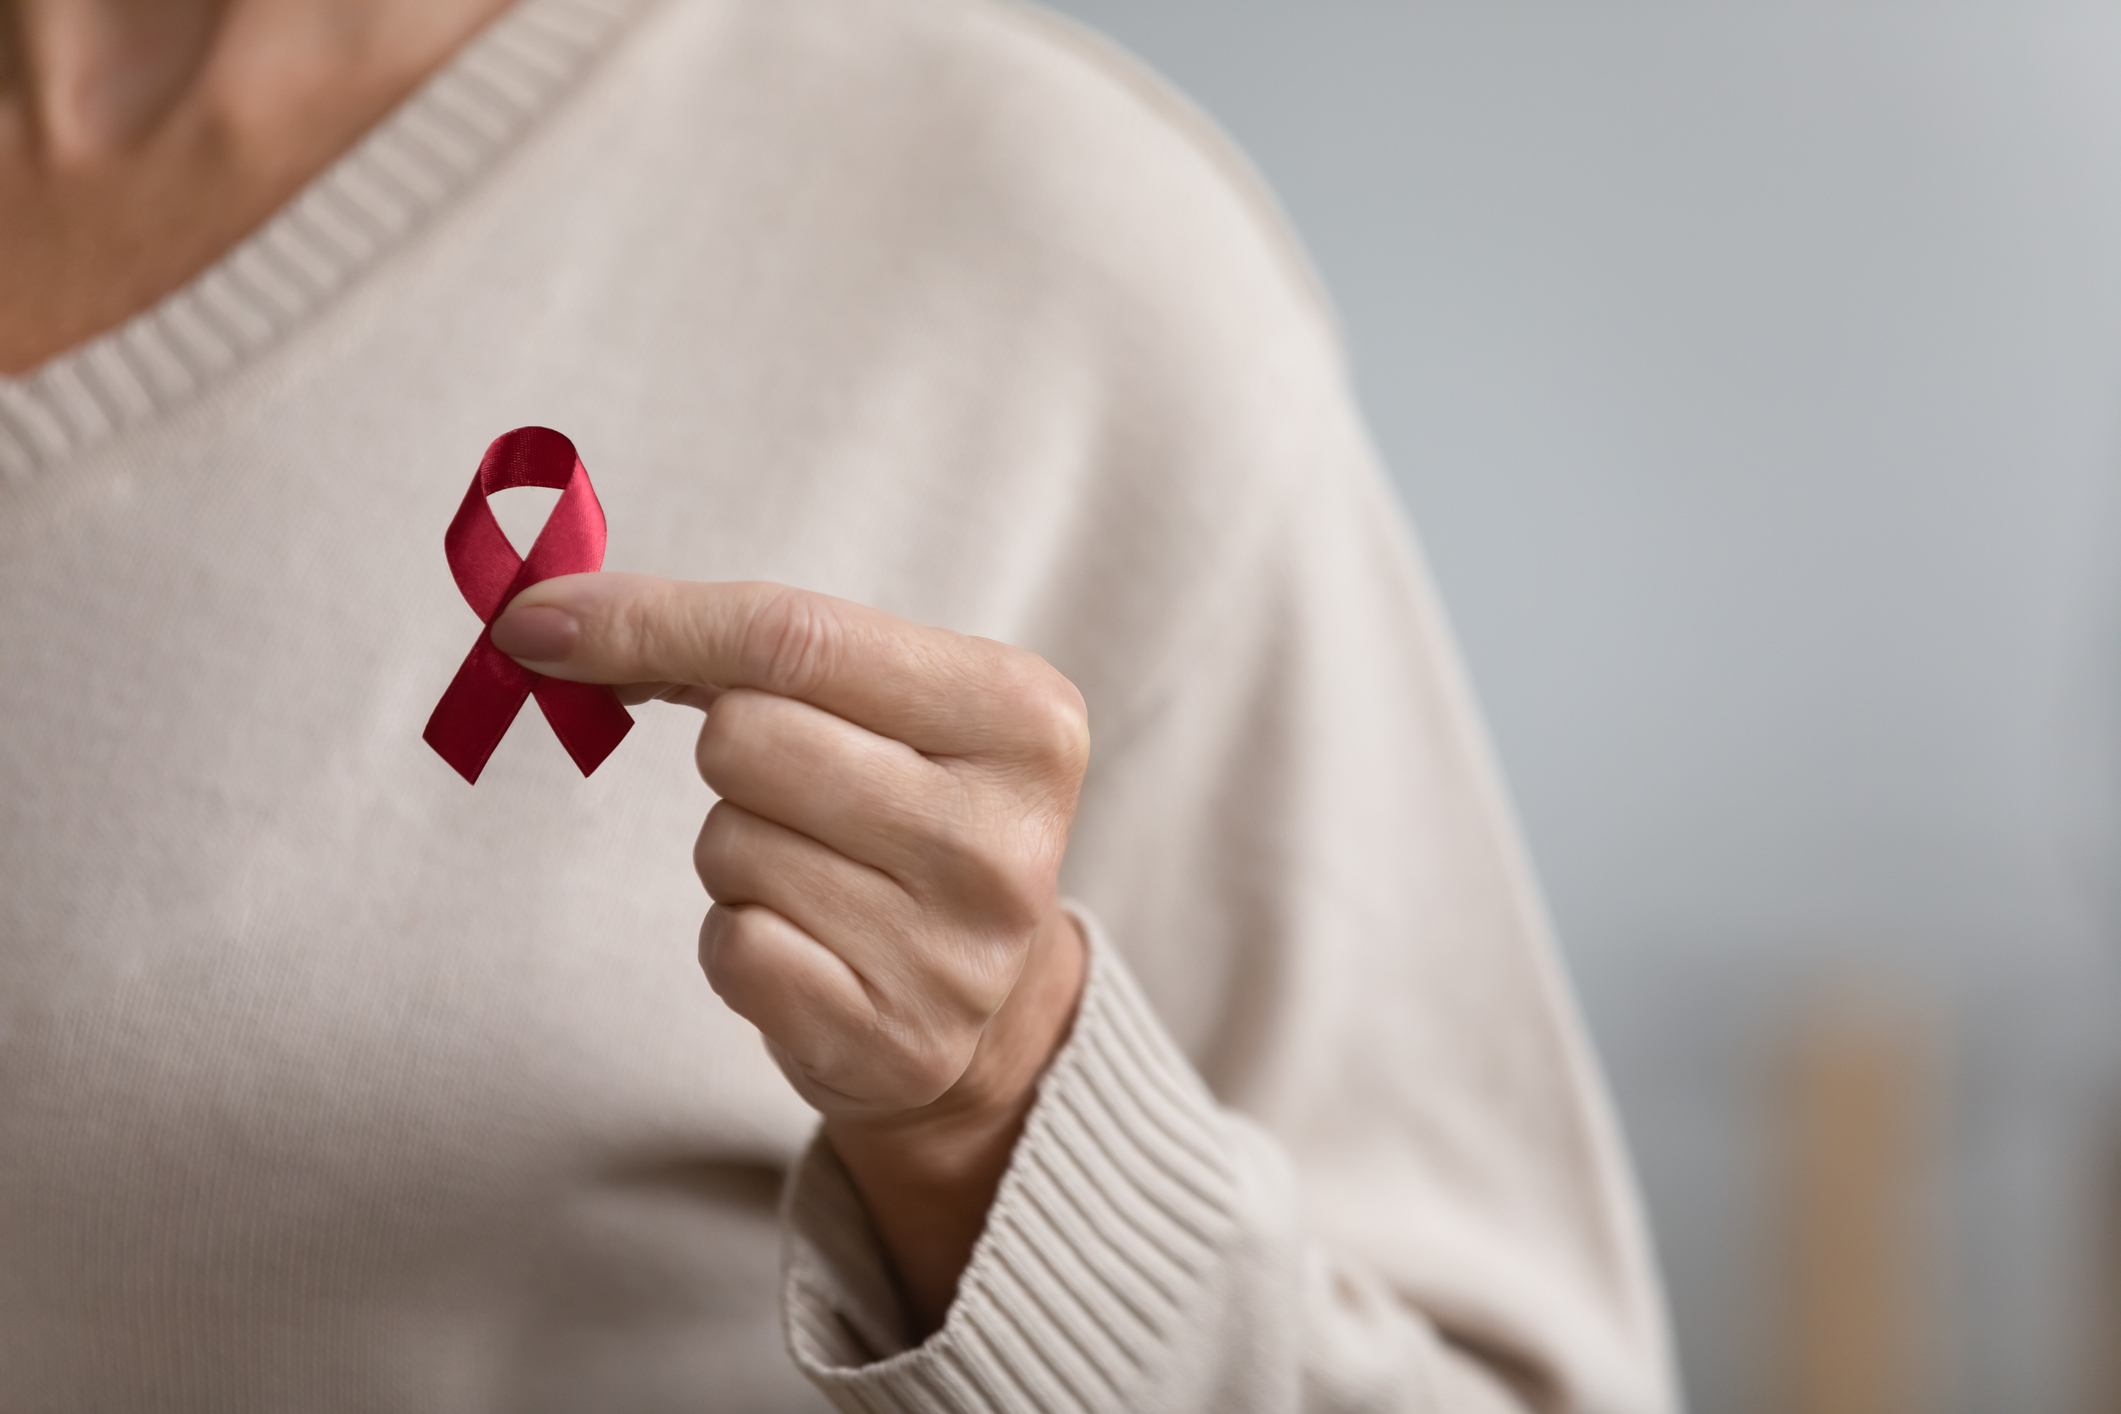 It May Come as a Surprise, but Older Women Get HIV, Too